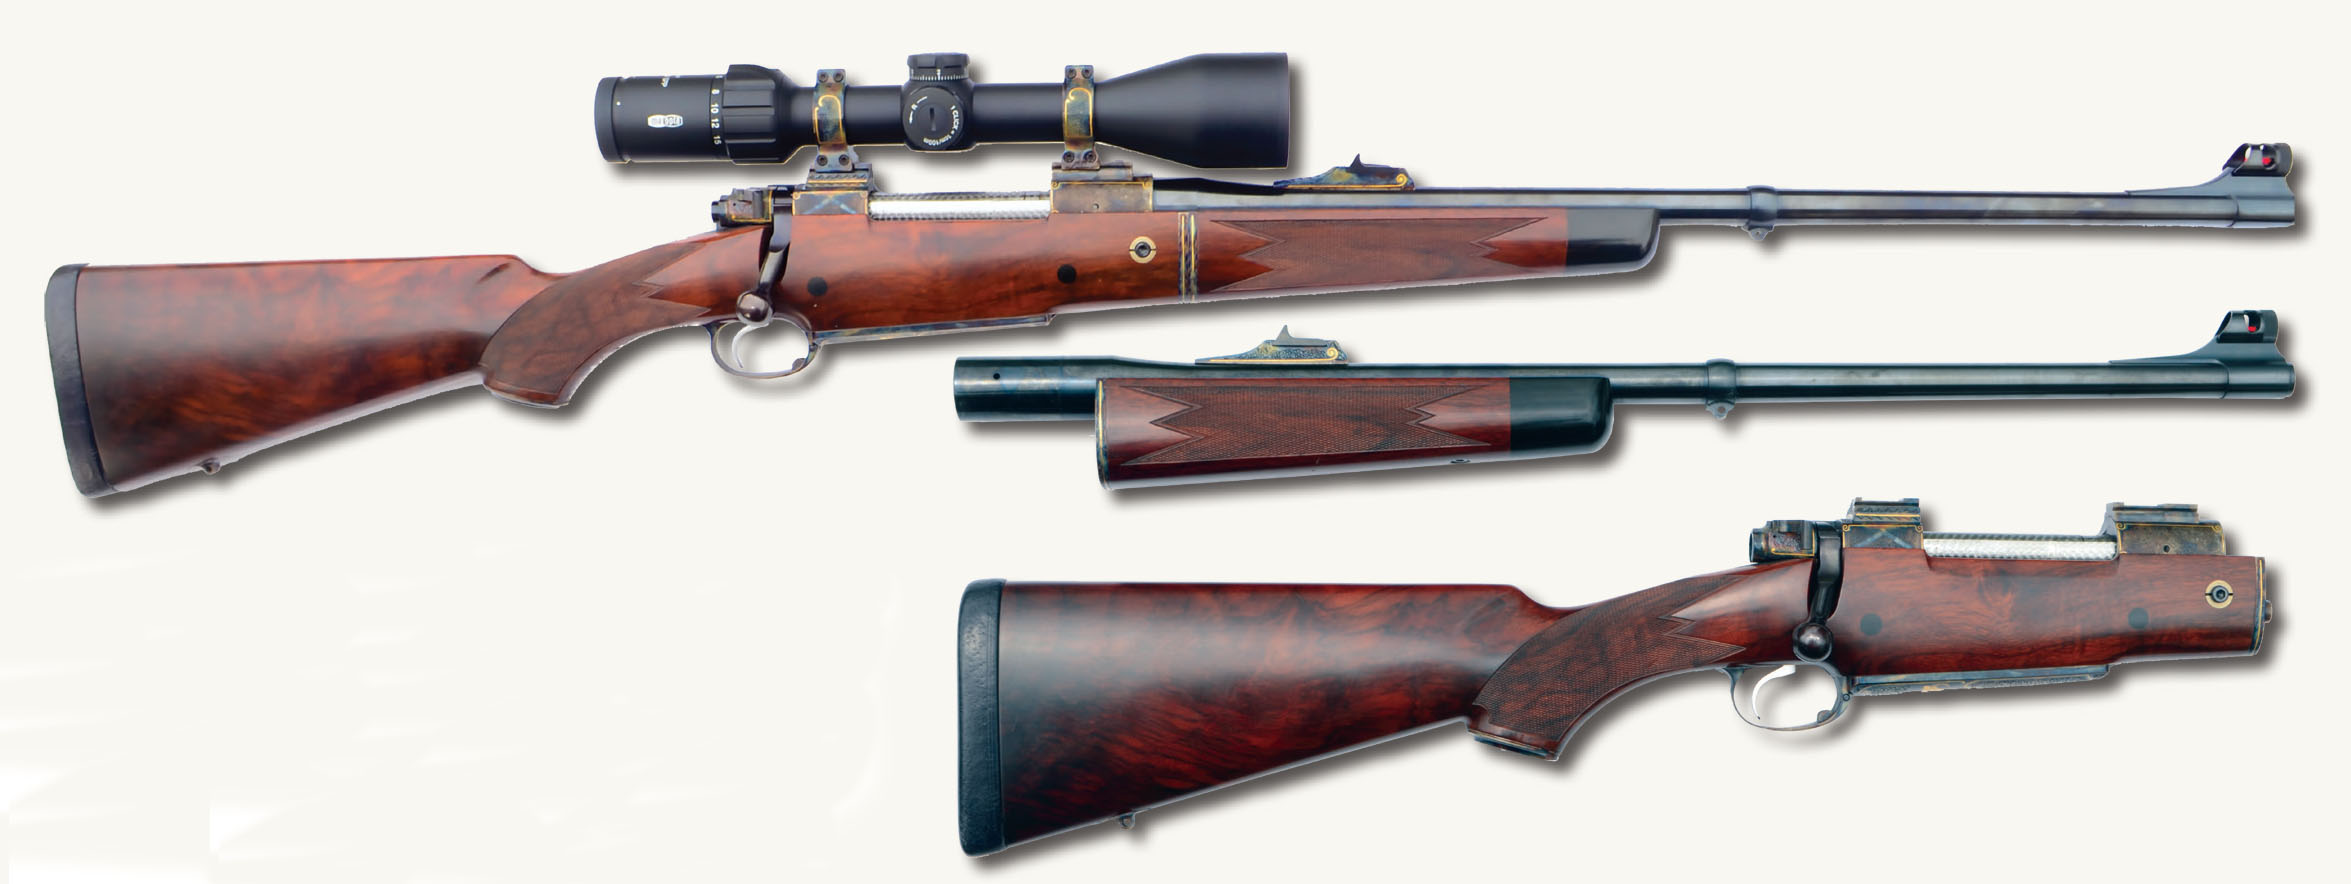 The Dakota Traveler takedown rifle employs a “sleeve within a sleeve” to attach the barrel. With the bolt closed, the  locking lugs hold the rifle together; with the bolt open, the sleeve grips the barrel as long as the right Allen screw has been tightened (visible in the stock below the action ring.